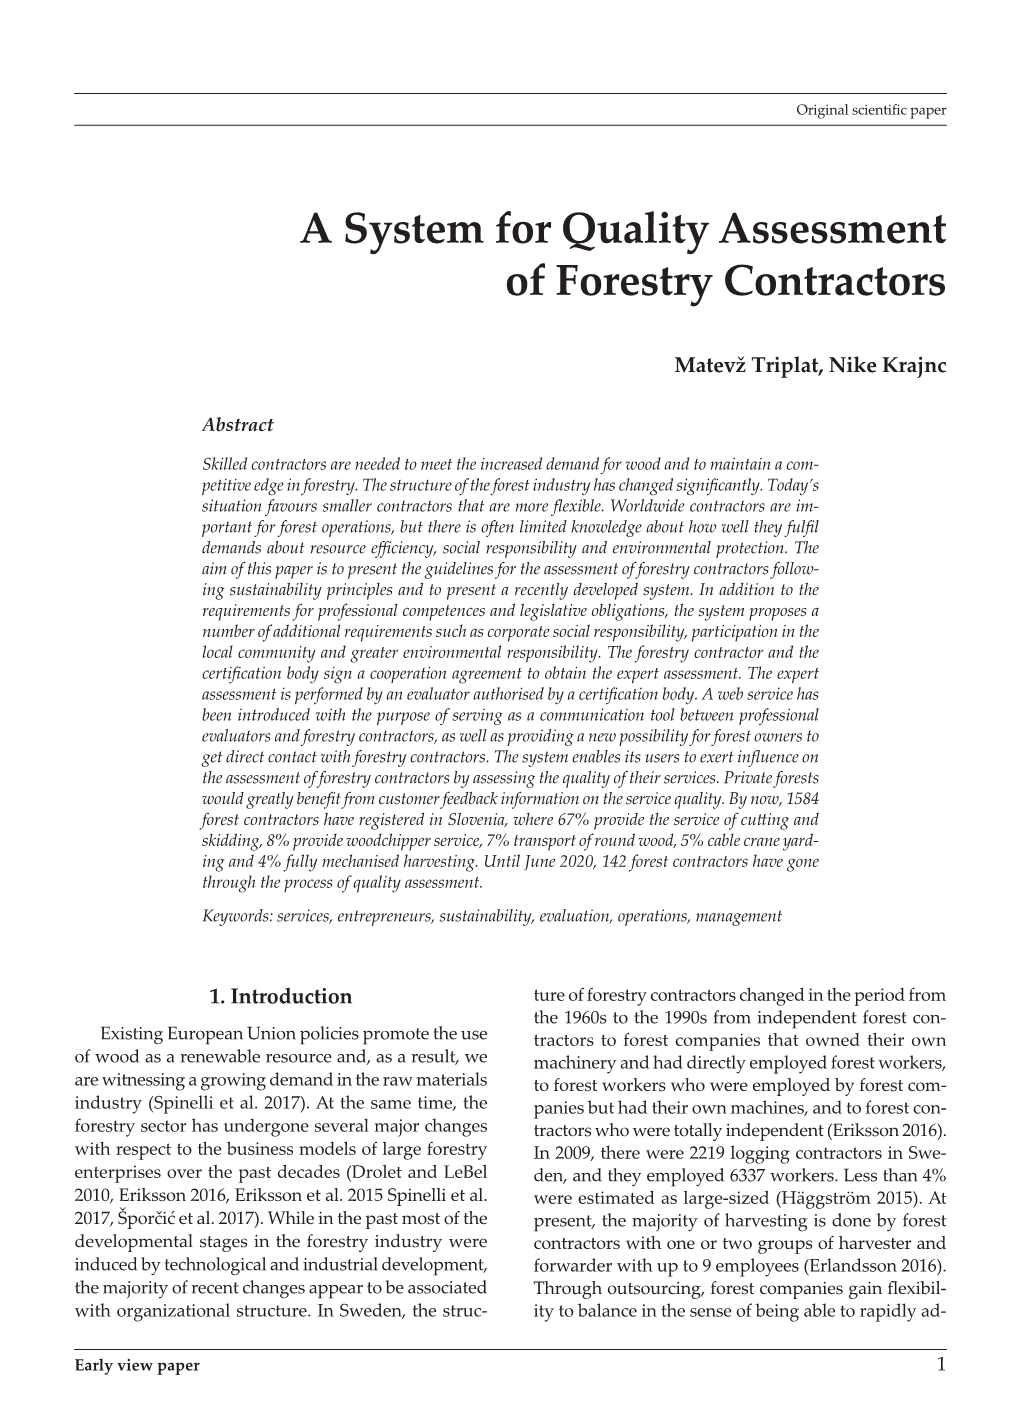 A System for Quality Assessment of Forestry Contractors